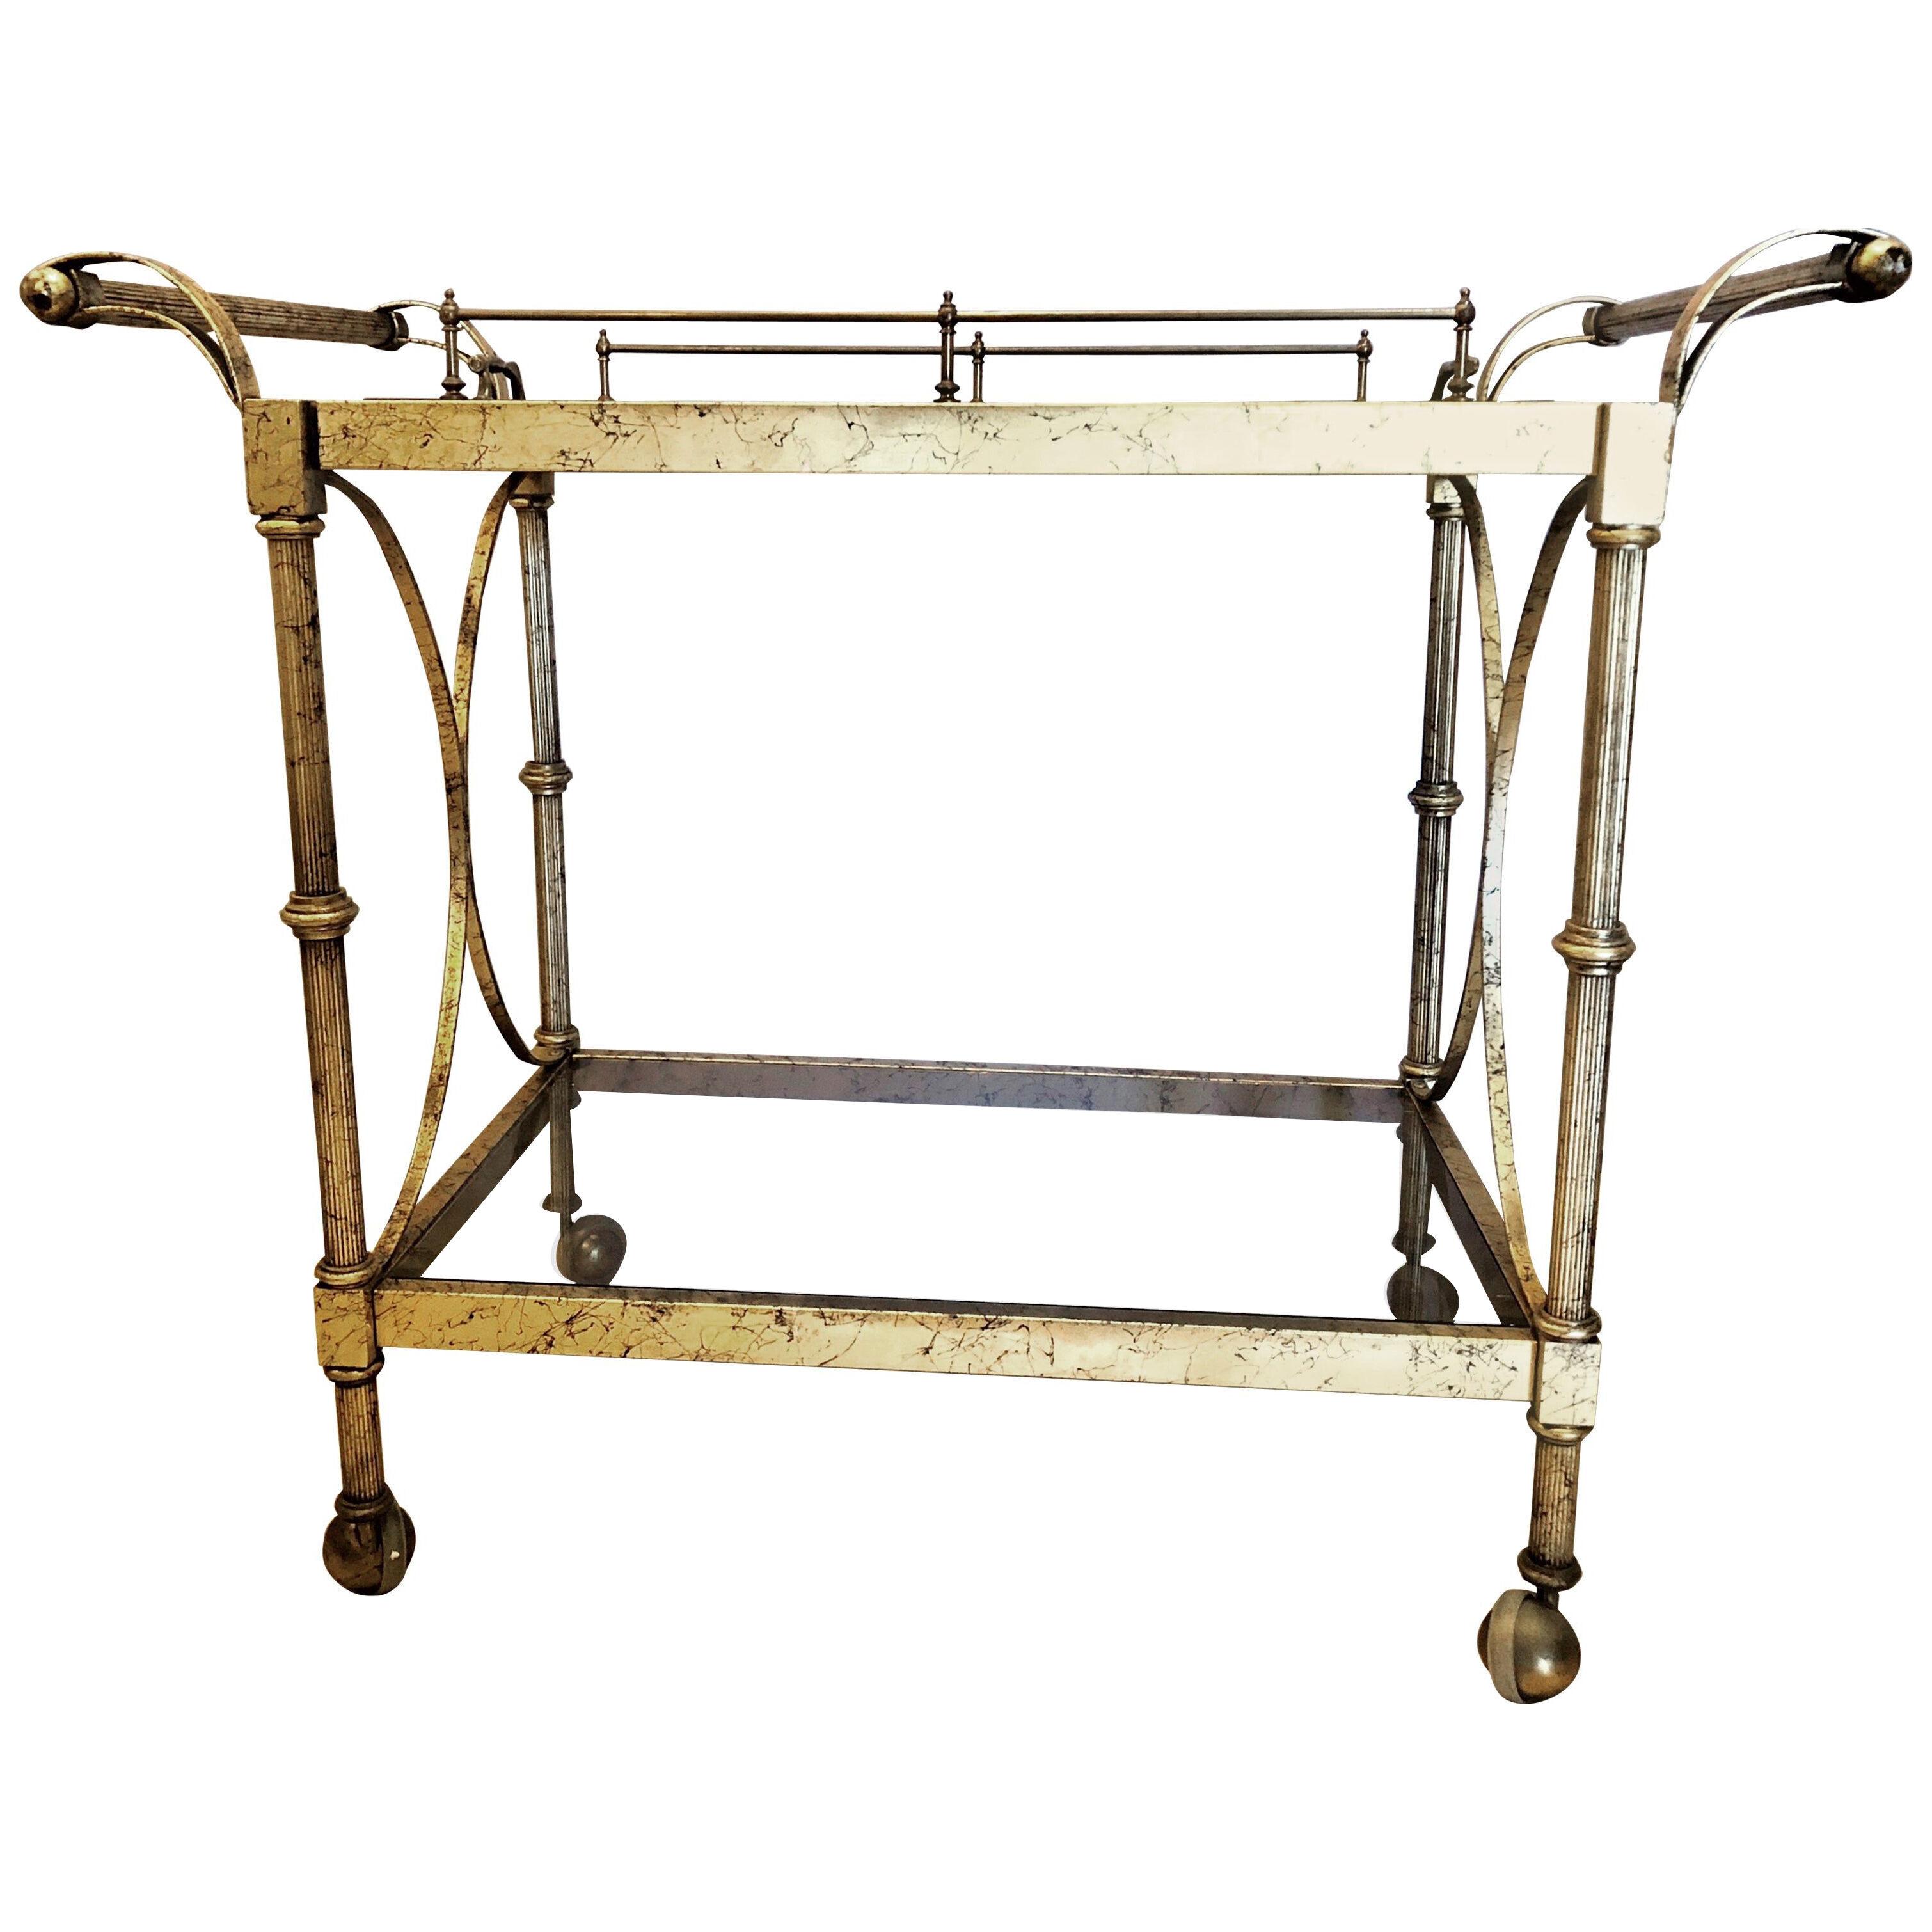 Hollywood Regency Two-Tier Serving Cart in a Faux Marbleized Design